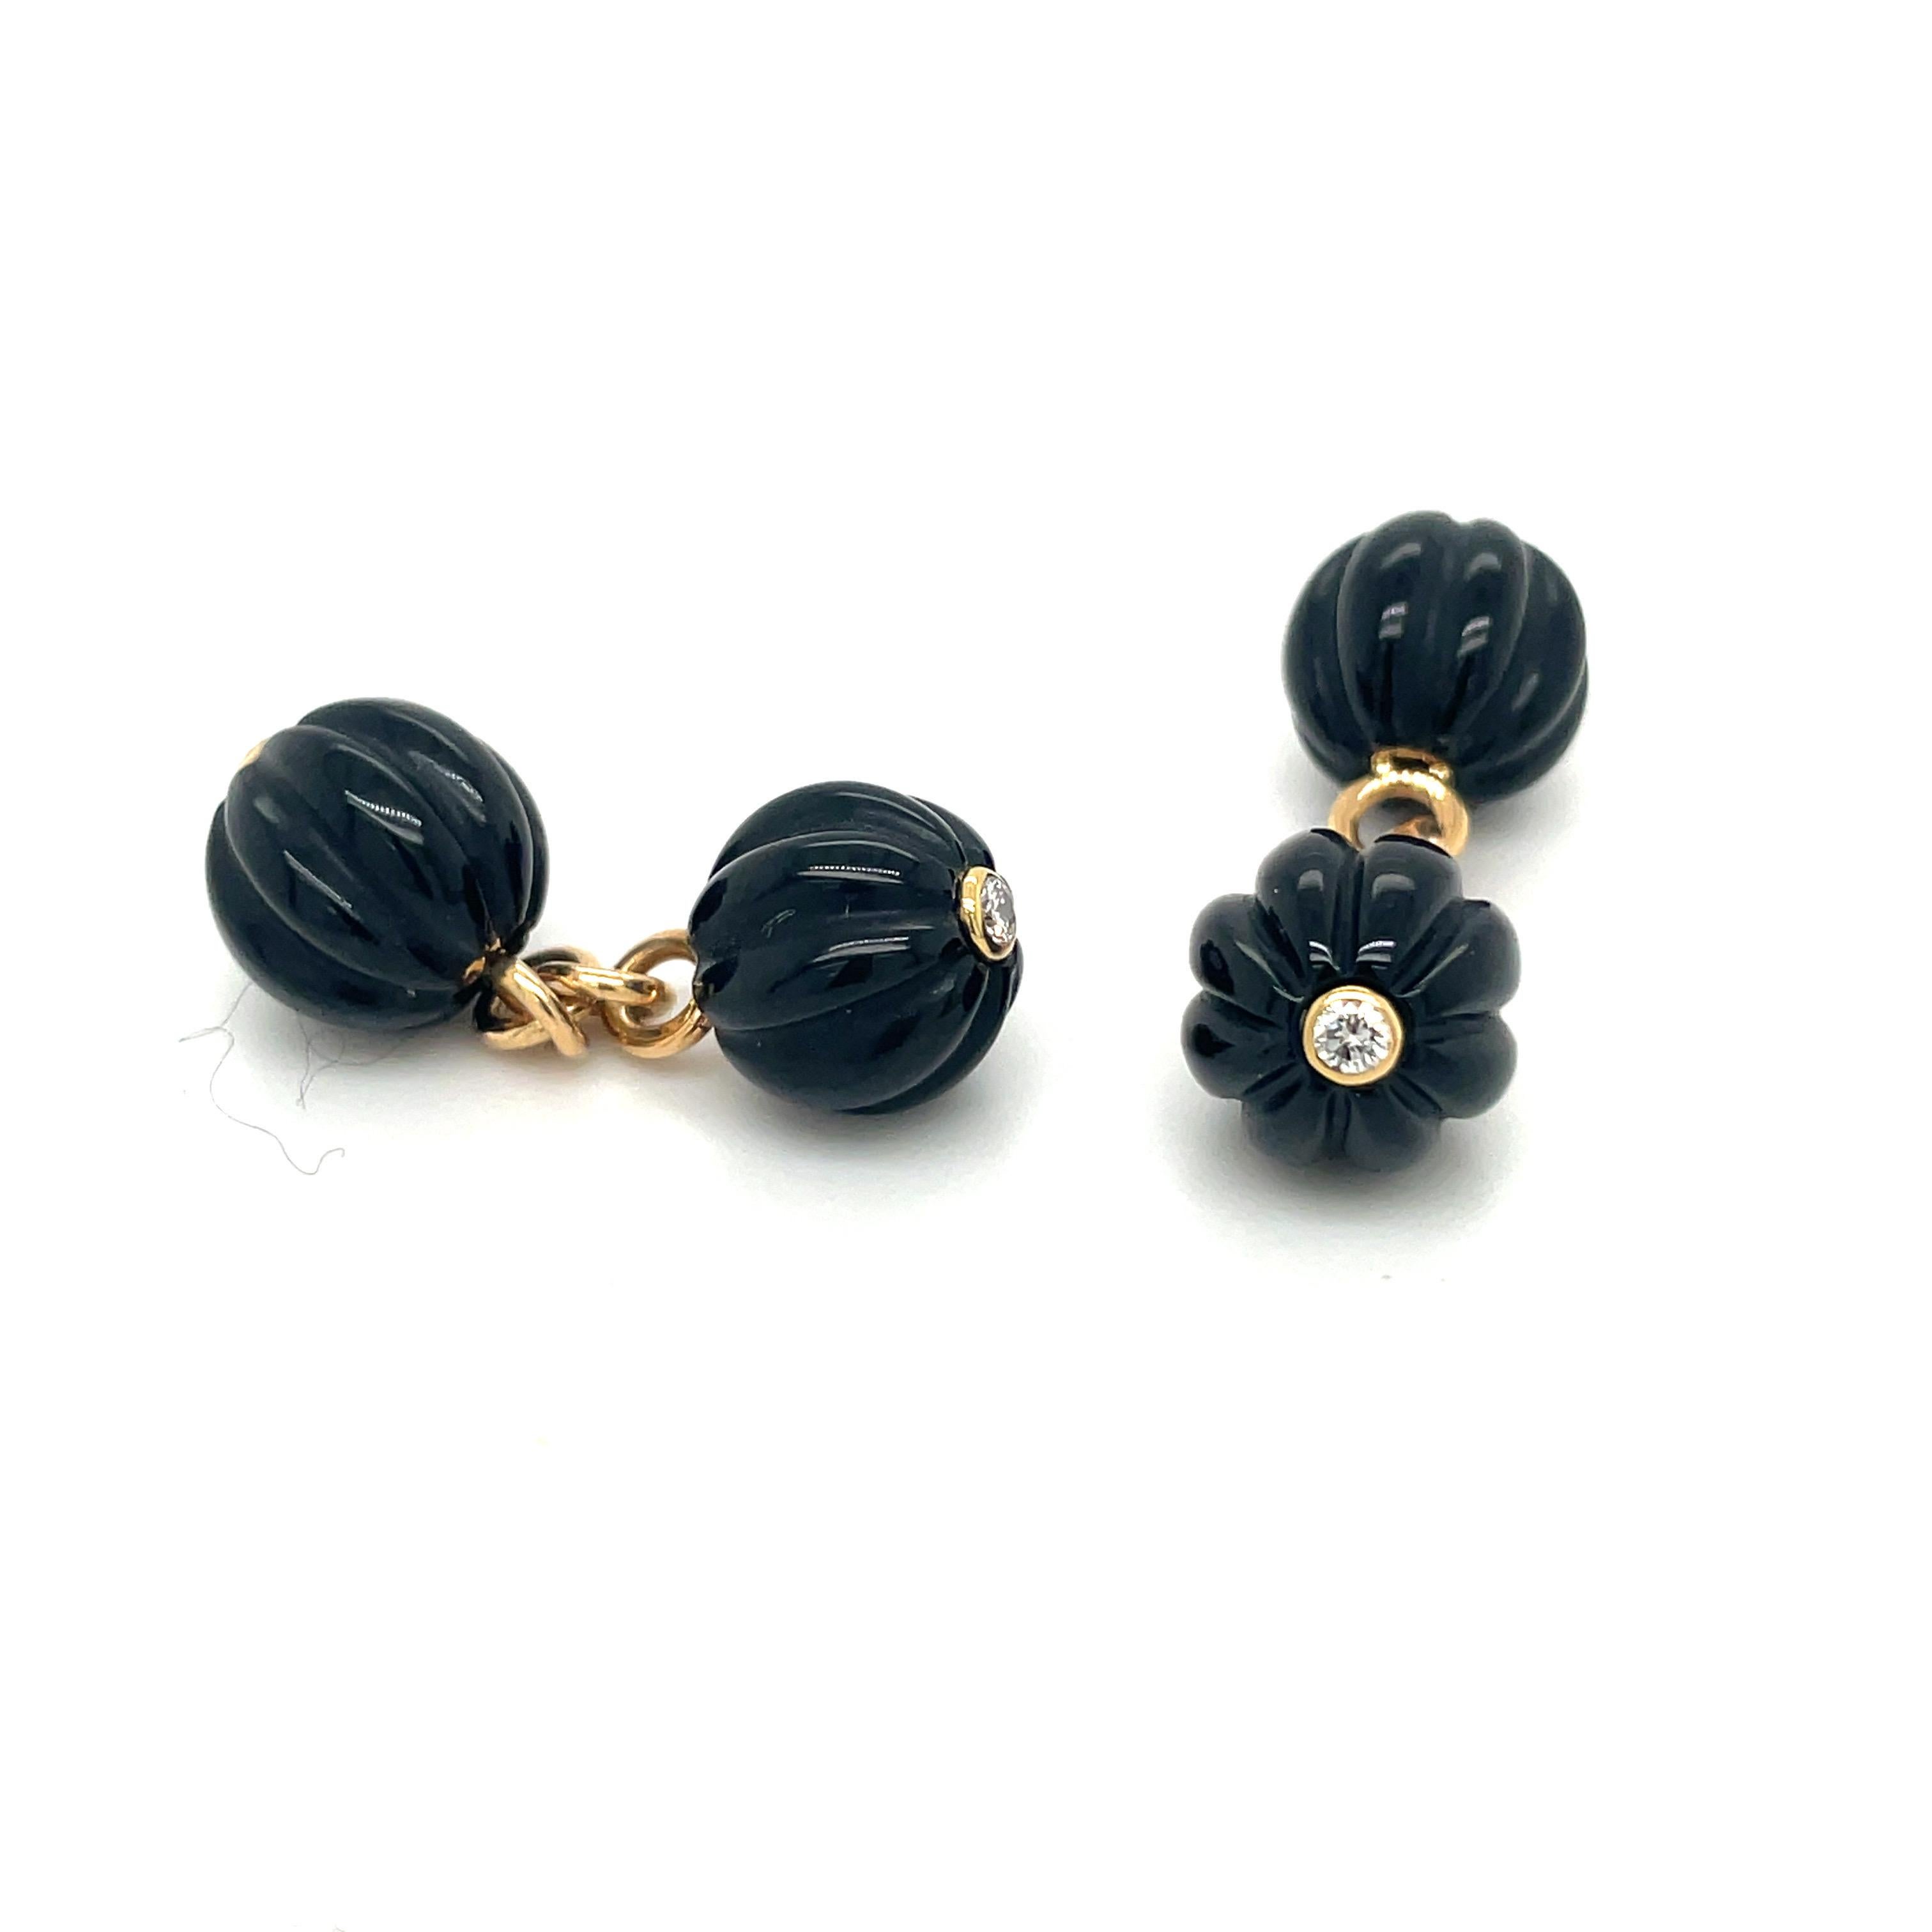 Retro Trianon Fluted Onyx Bead Cuff Links with 14KT and Diamond For Sale